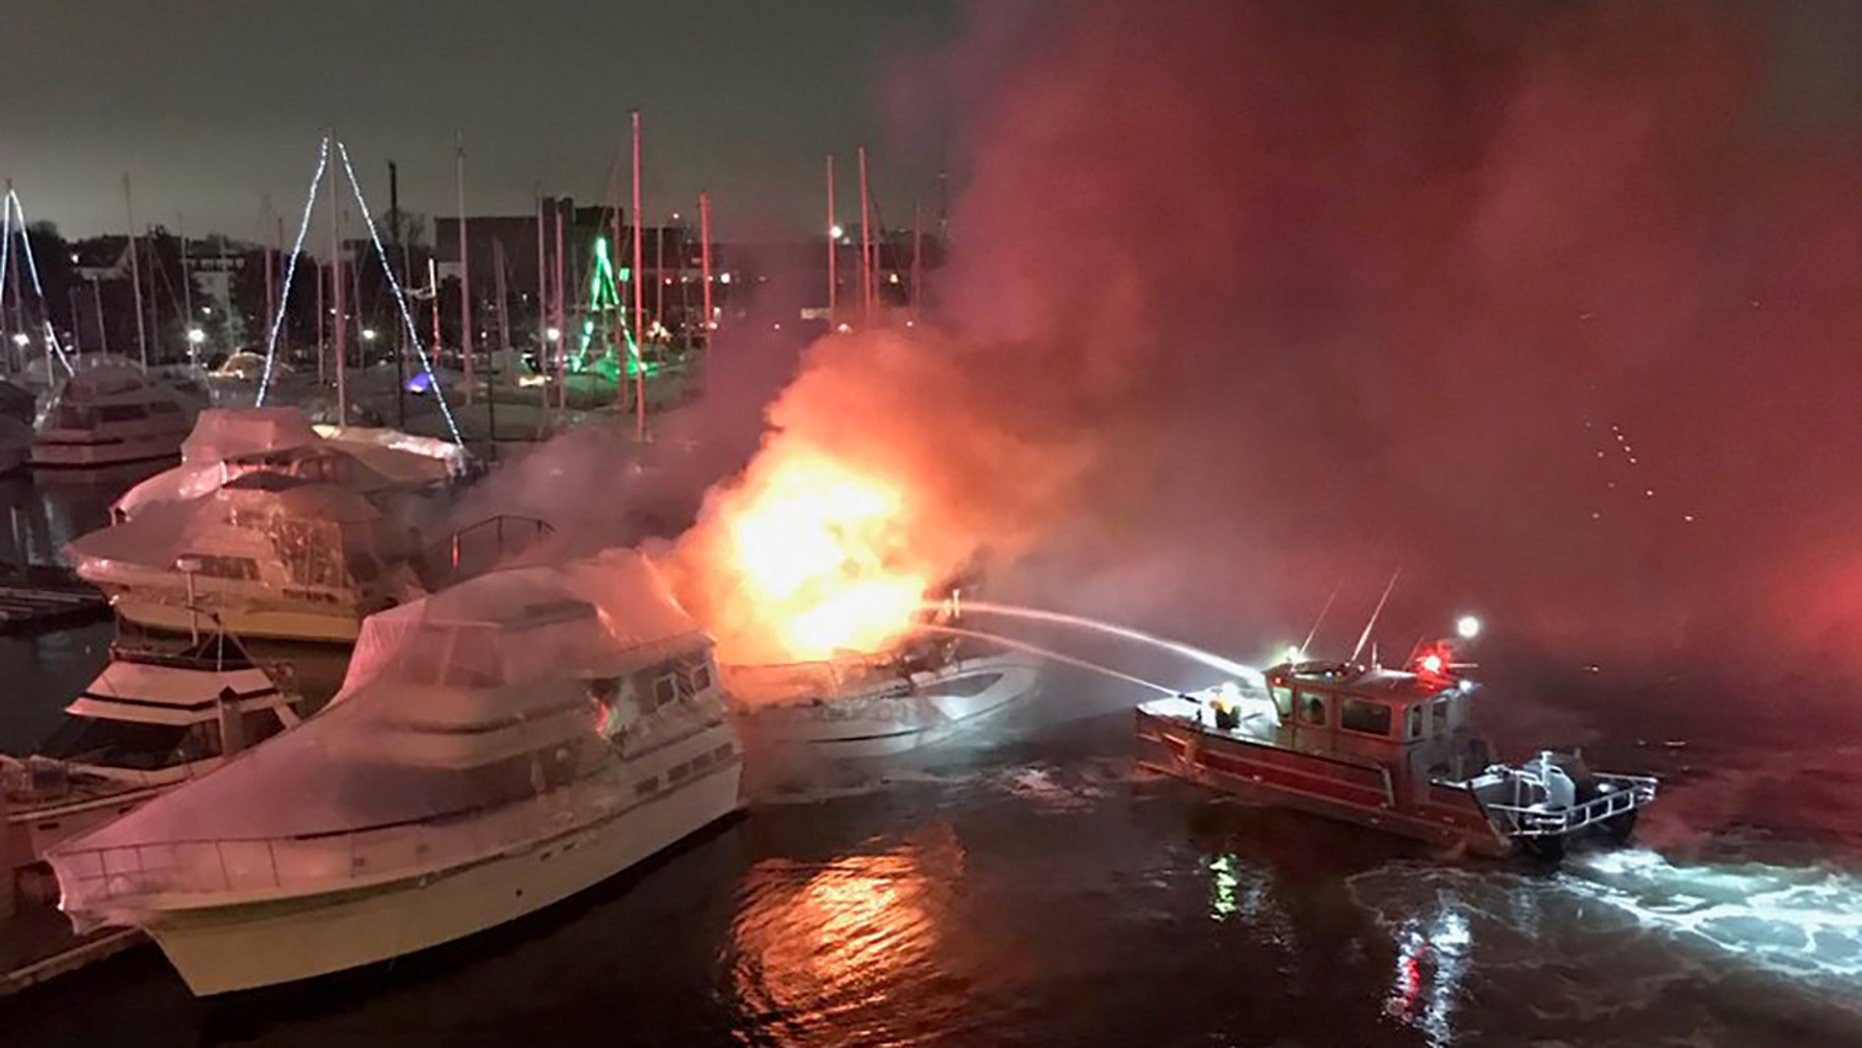 Boston fire crews battle flames in Charlestown marina; 2 boats sink, officials say